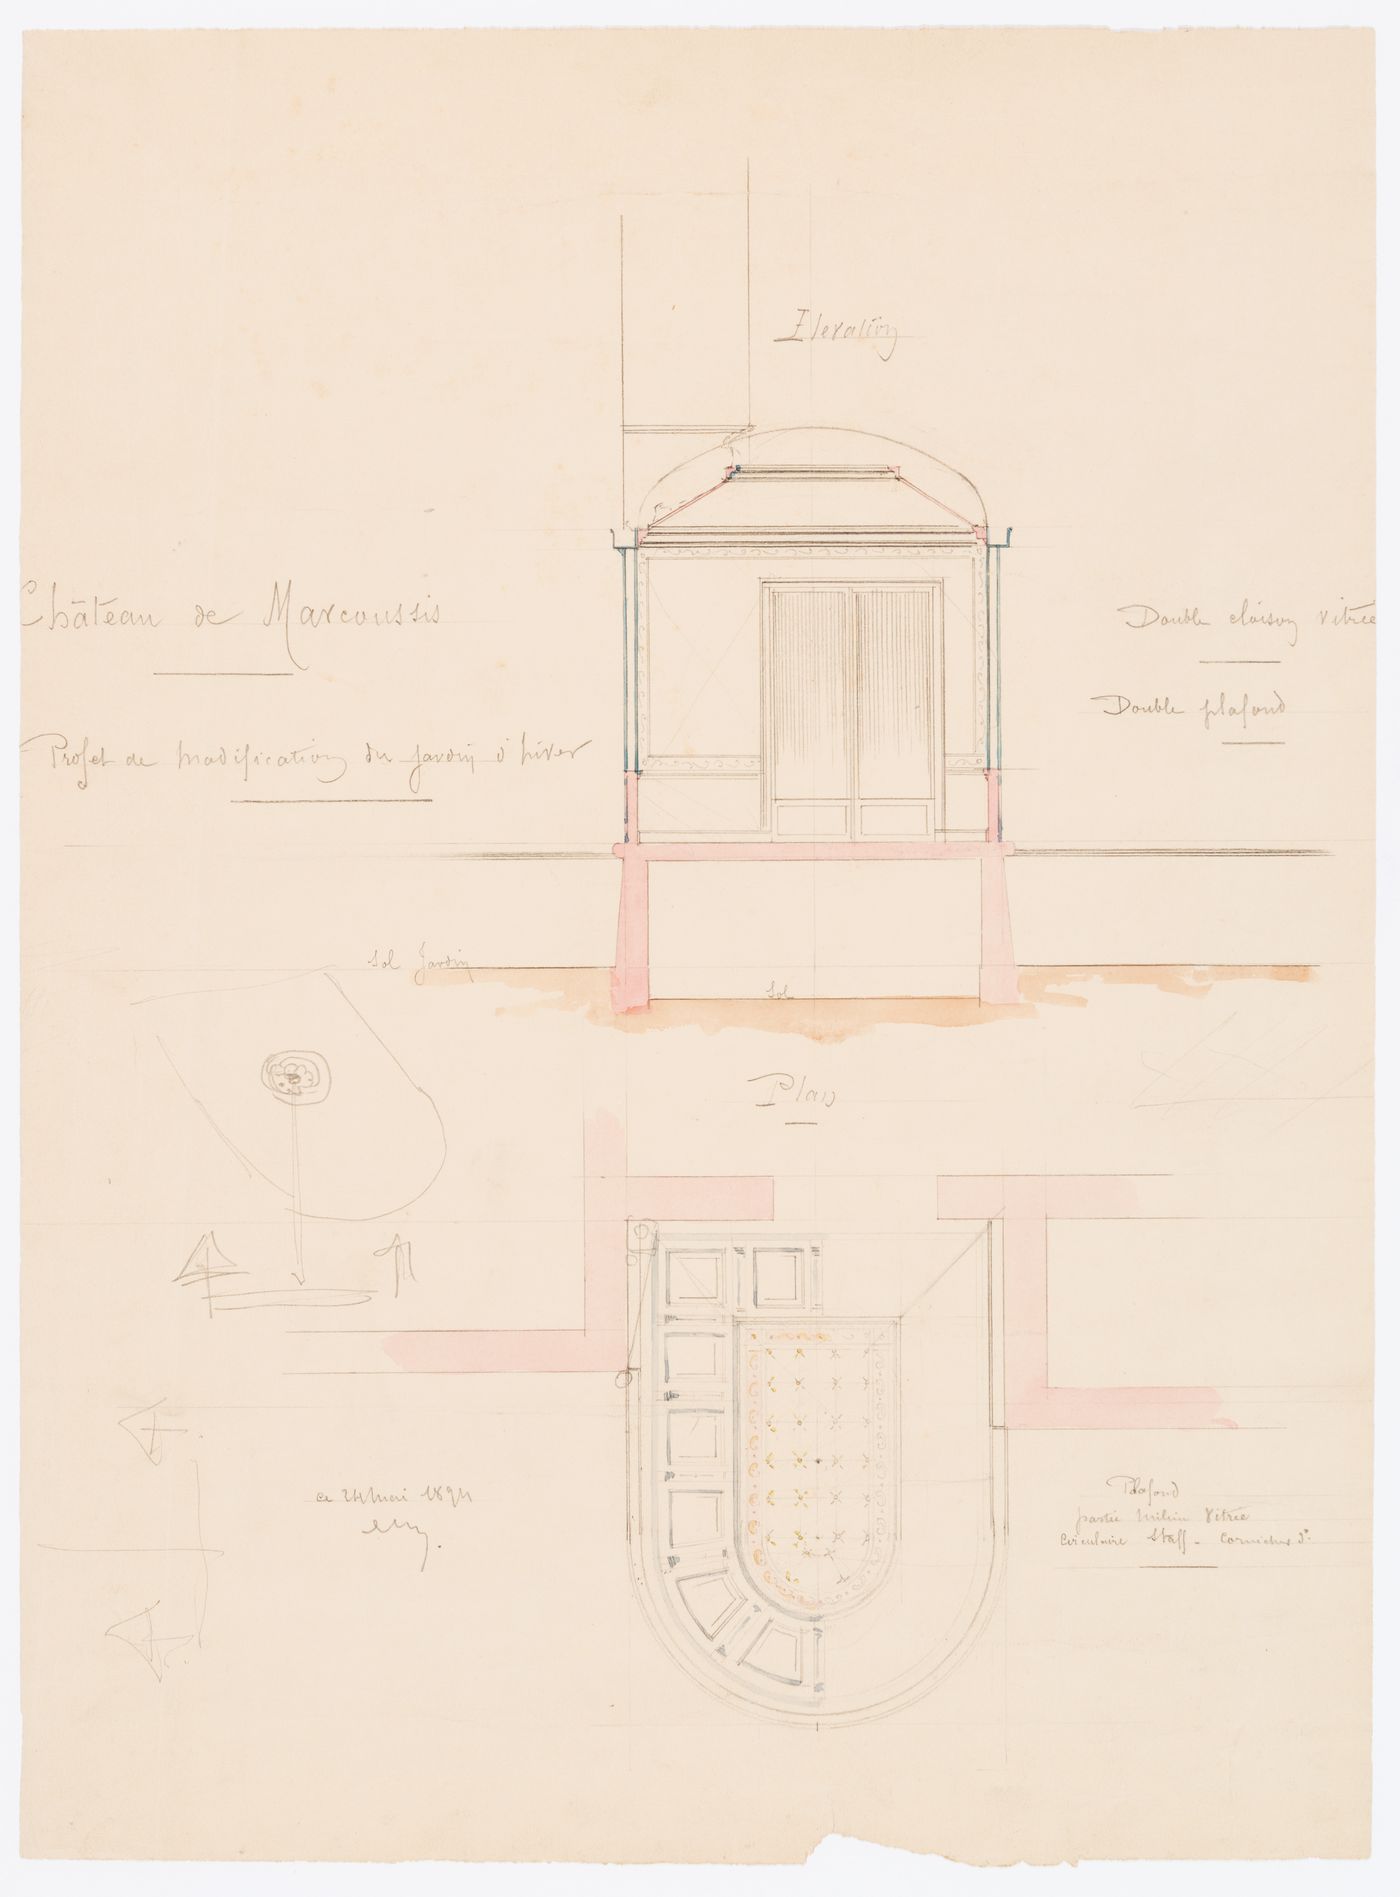 Château de Marcoussis: Section and plan for alterations to the winter garden, possibly for the ceiling